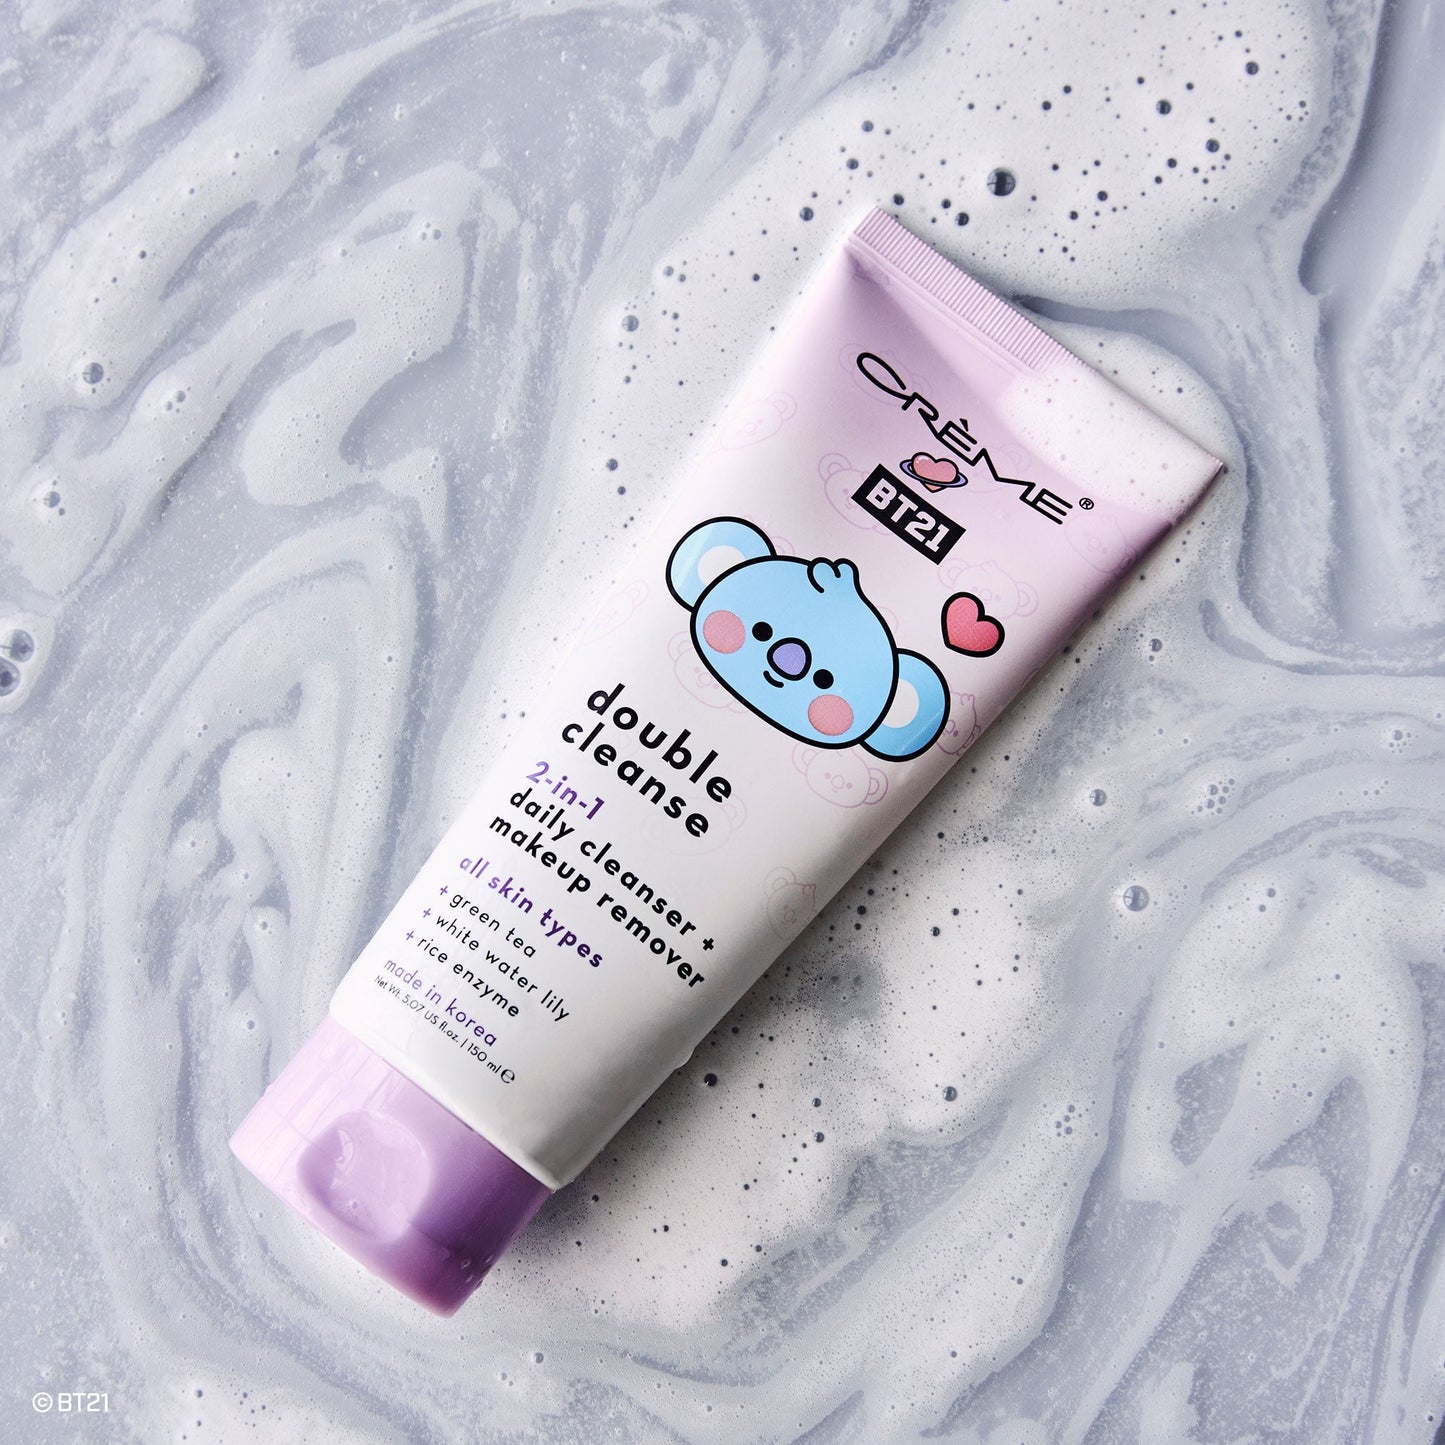 KOYA Double Cleanse 2-In-1 Facial Cleanser Facial Cleansers The Crème Shop x BT21 BABY 